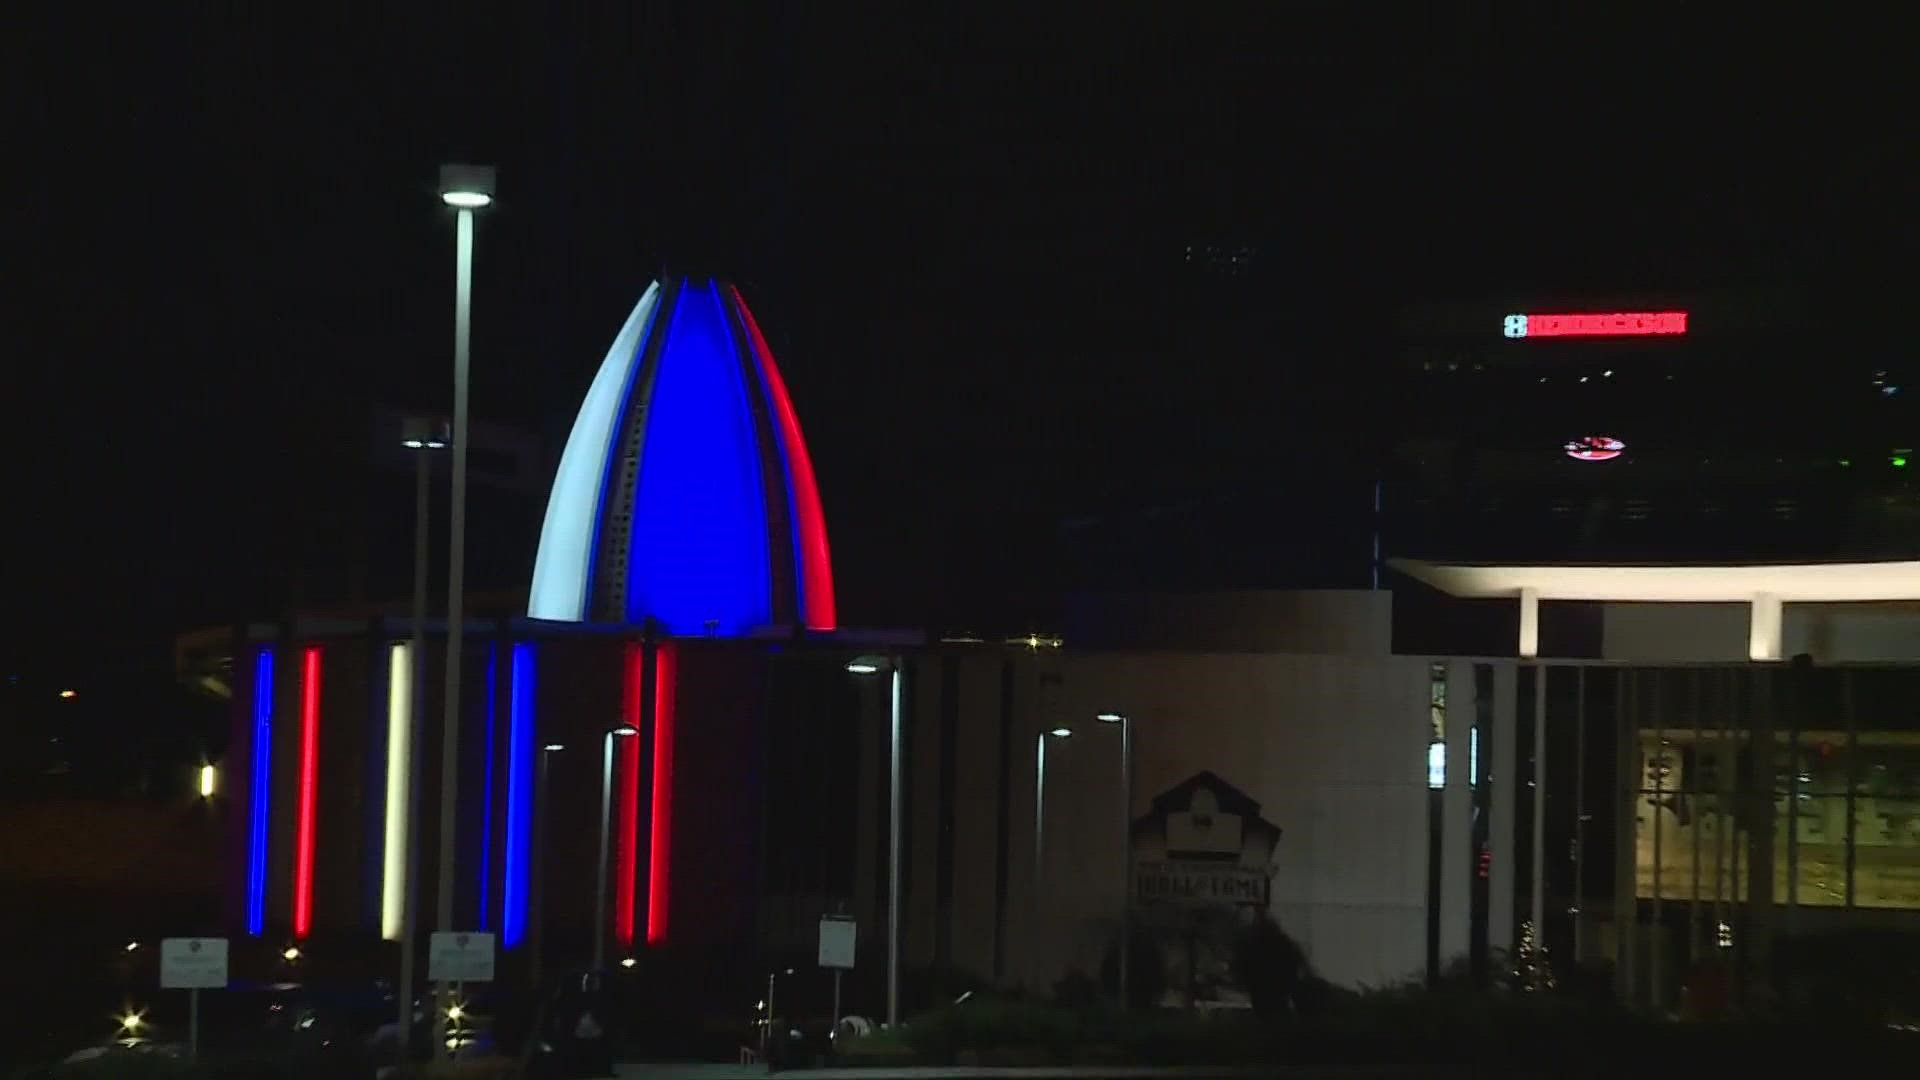 The Pro Football Hall of Fame in Canton is illuminated in red, white and blue to show support for Damar Hamlin and the Buffalo Bills after his collapse on the field.